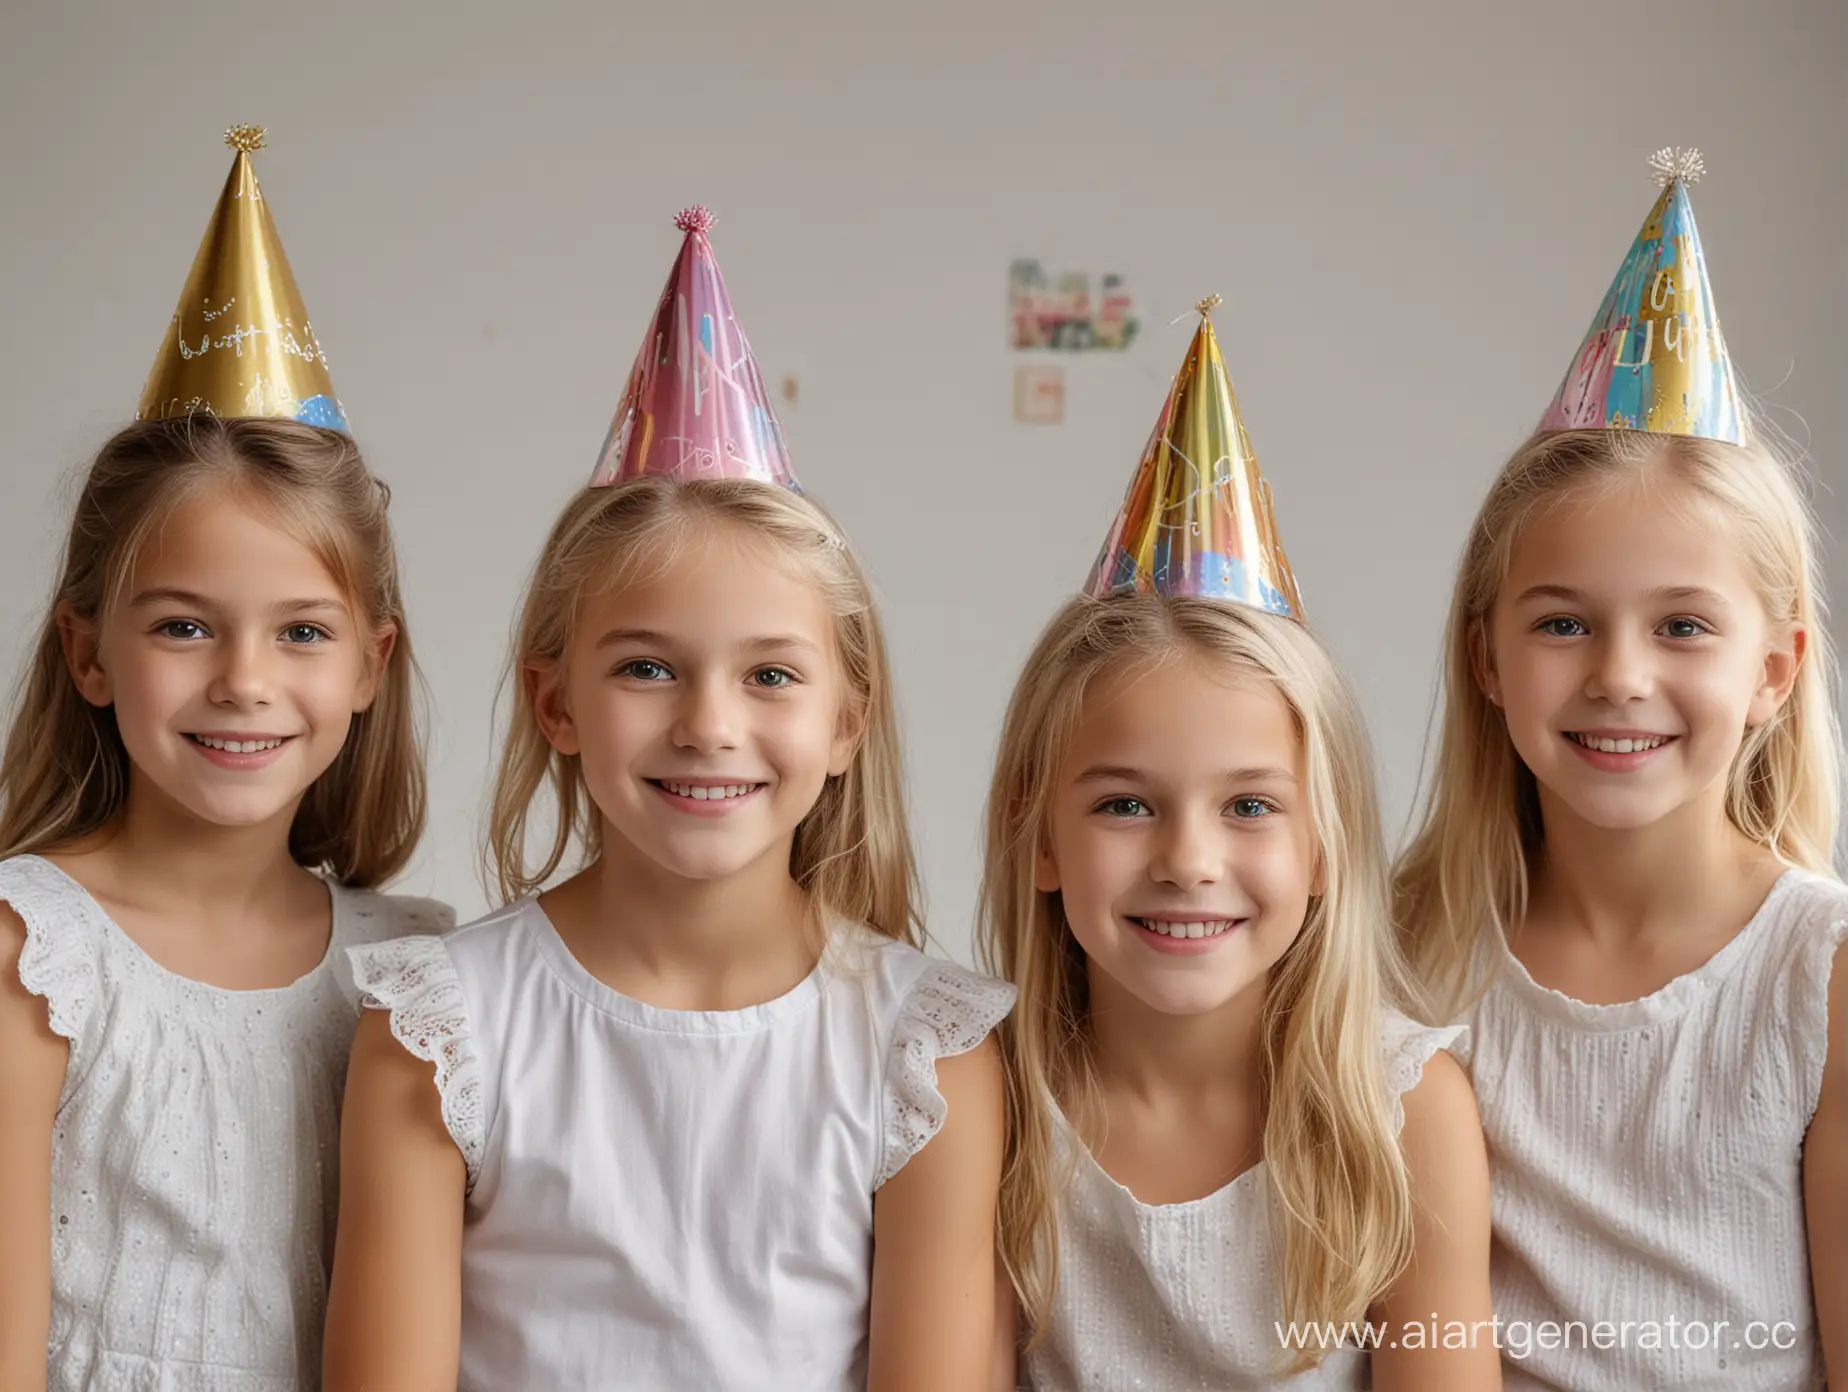 image featuring 5  European glamour dressed, light-haired children 12 years old, one of them wearing birthday hat,  The children should be positioned in a way that they are all visible and appear to be enjoying the celebration in Wednesday movie style, the children should be arranged in line, The scene should be lively and joyful, capturing the essence of a birthday party, clear white background, sharp focus, depth of field, 8k photo, HDR, professional lighting, taken with Canon EOS R5, 75mm lens